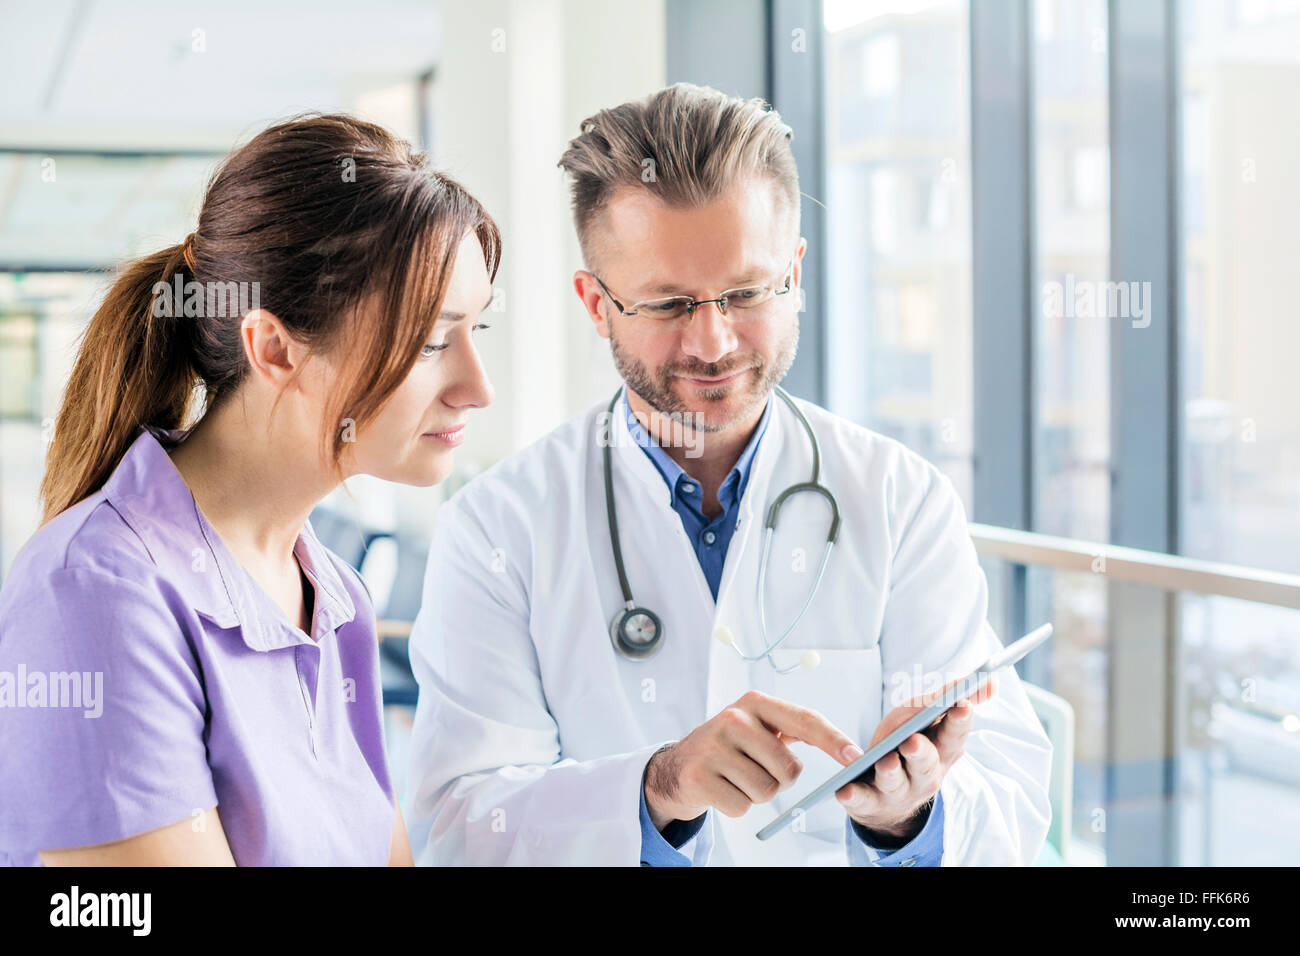 Doctor and nurse looking at digital tablet in hospital Stock Photo